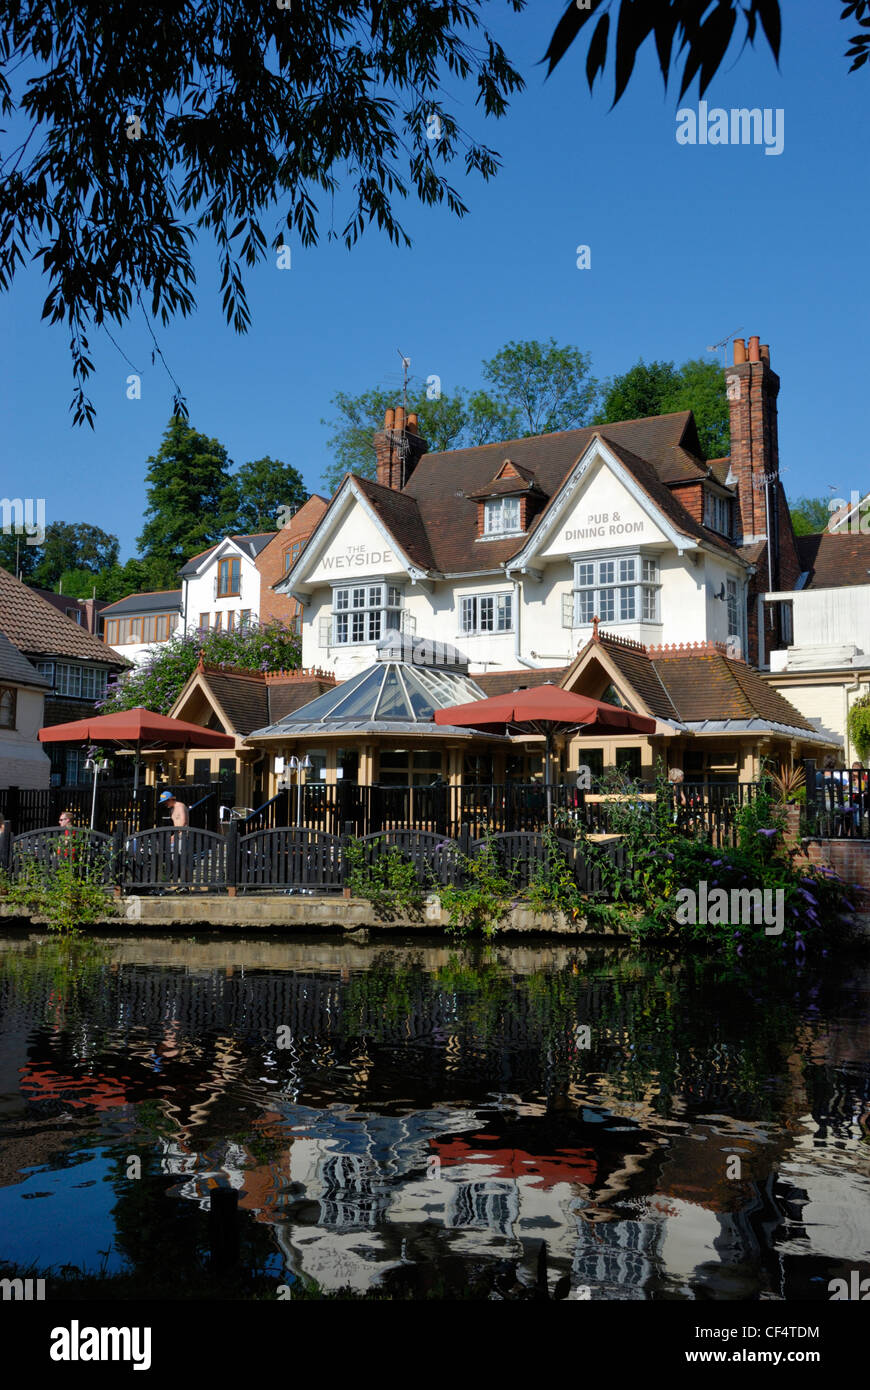 The Weyside Inn by the River Wey Navigation in Guildford. Stock Photo